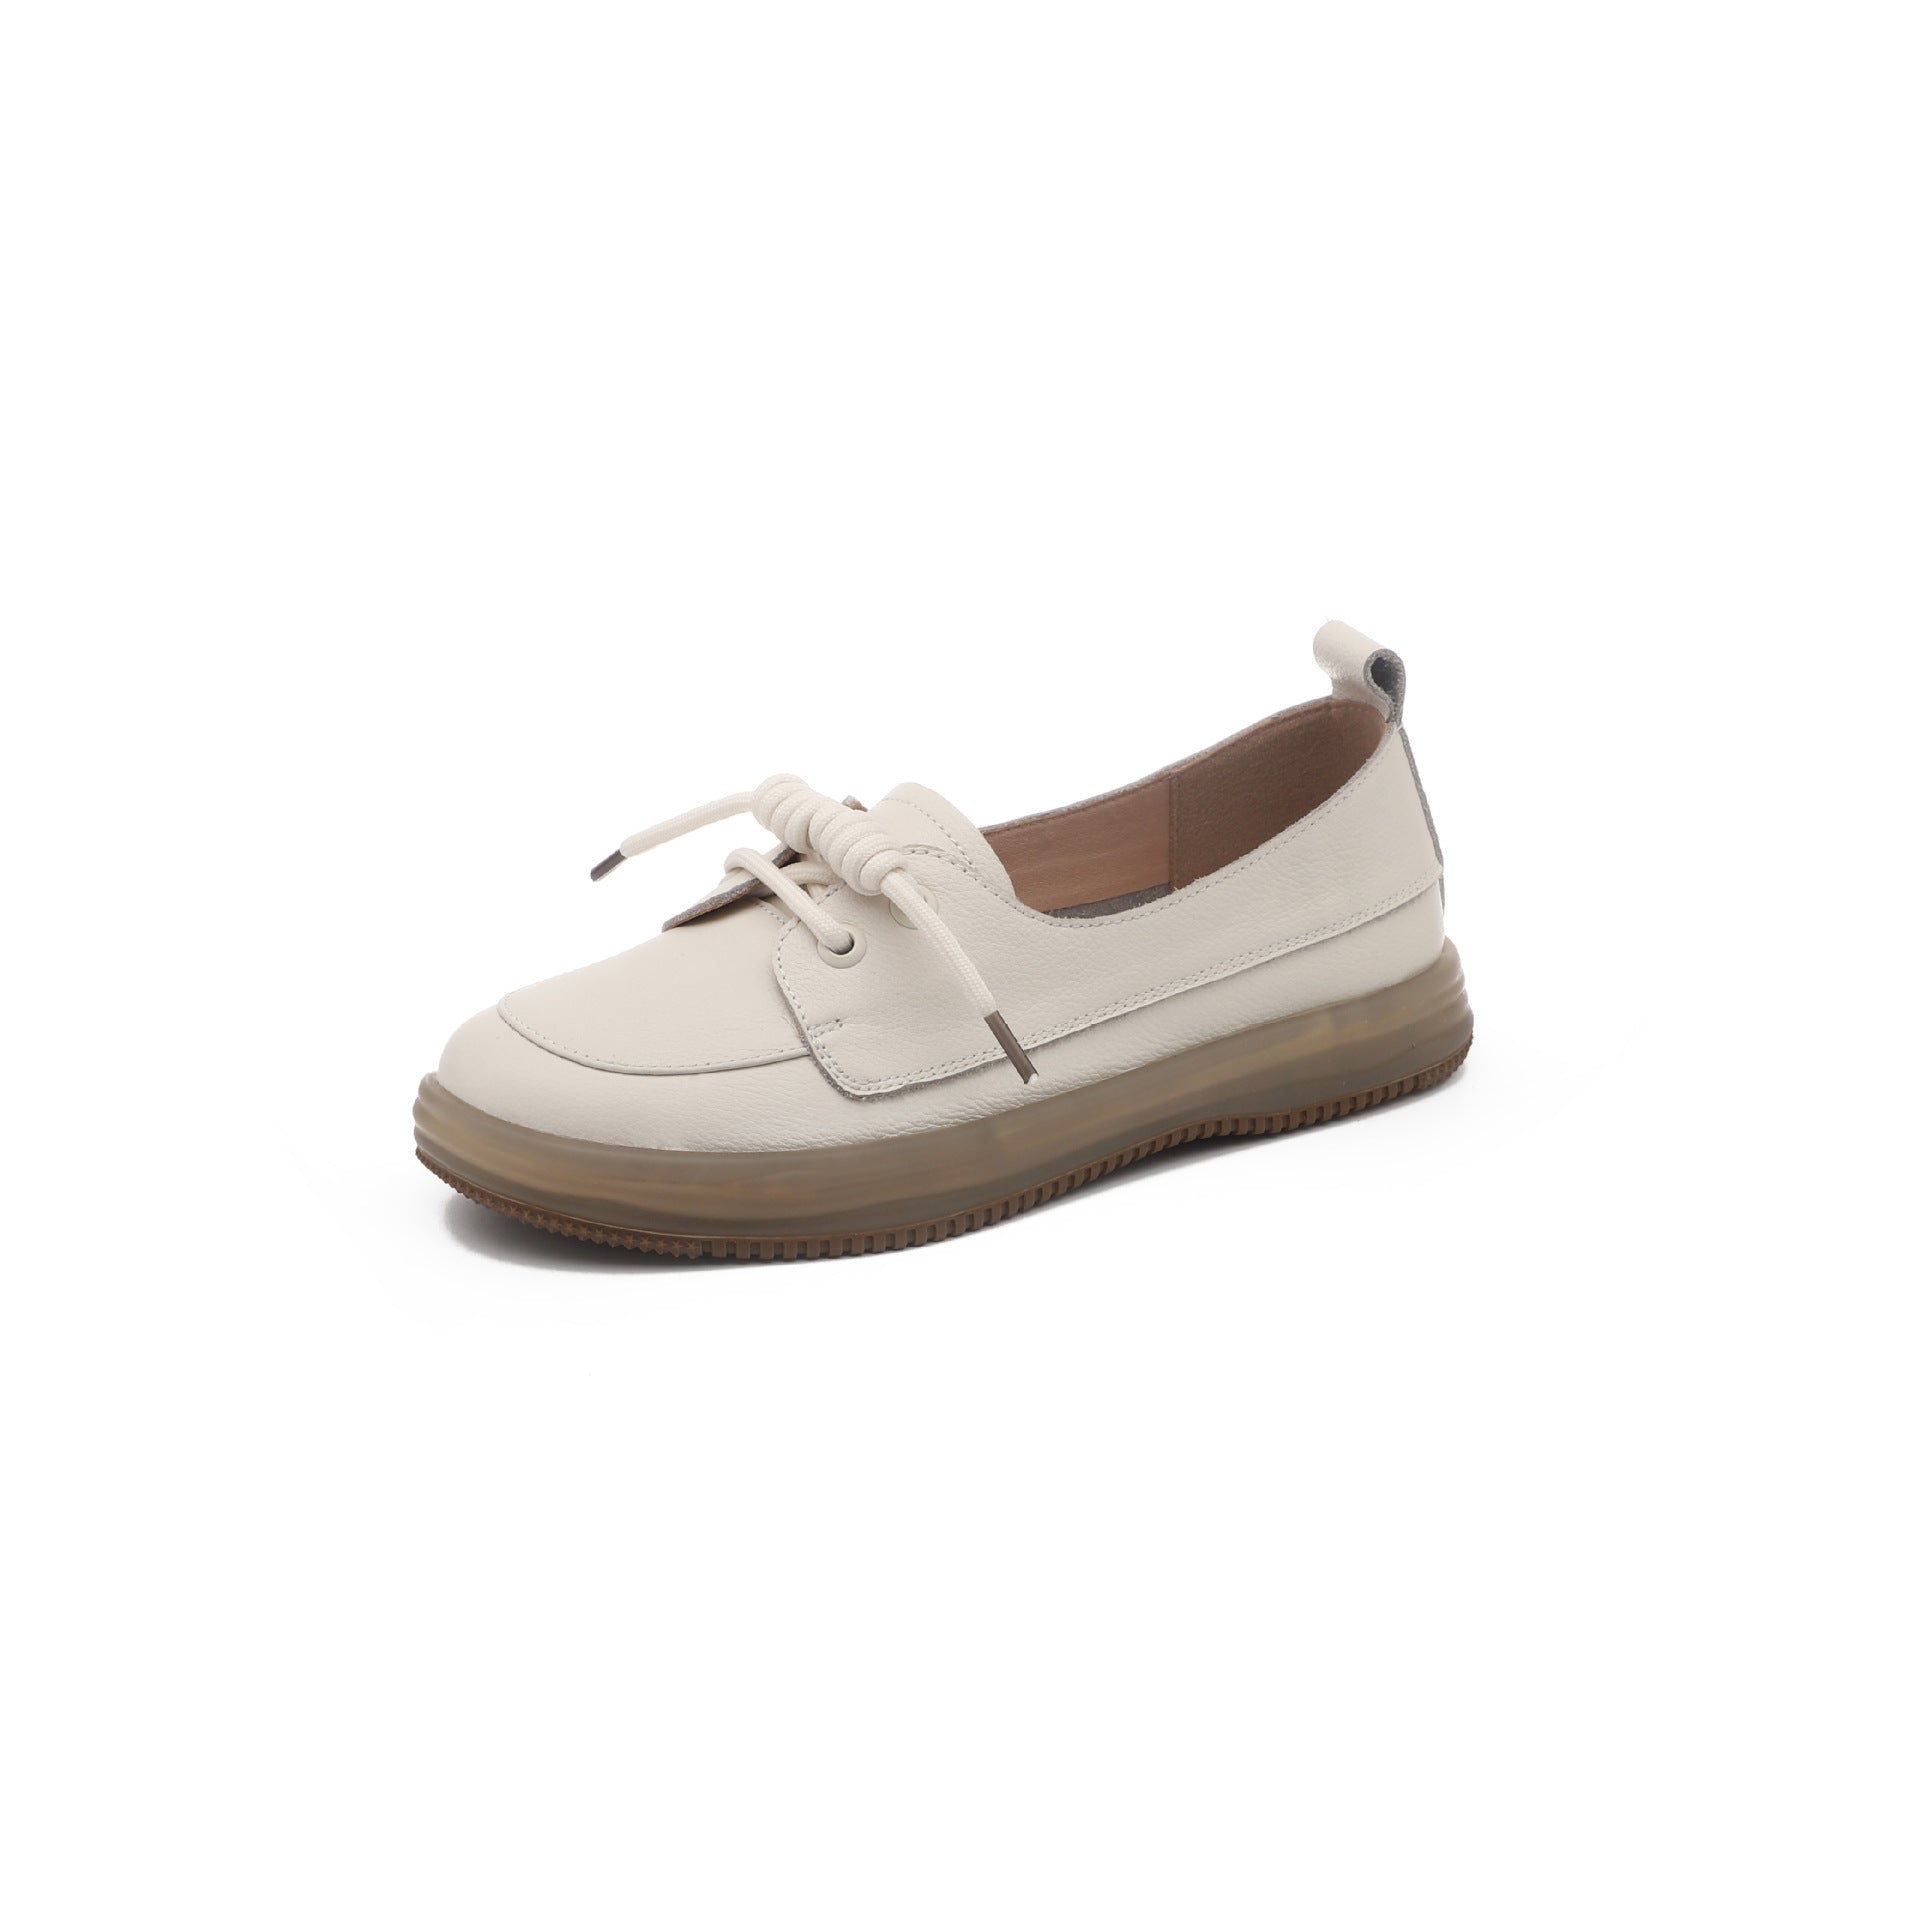 Women's Slip-on Soft Bottom Pregnant Flat Breathable Casual Shoes